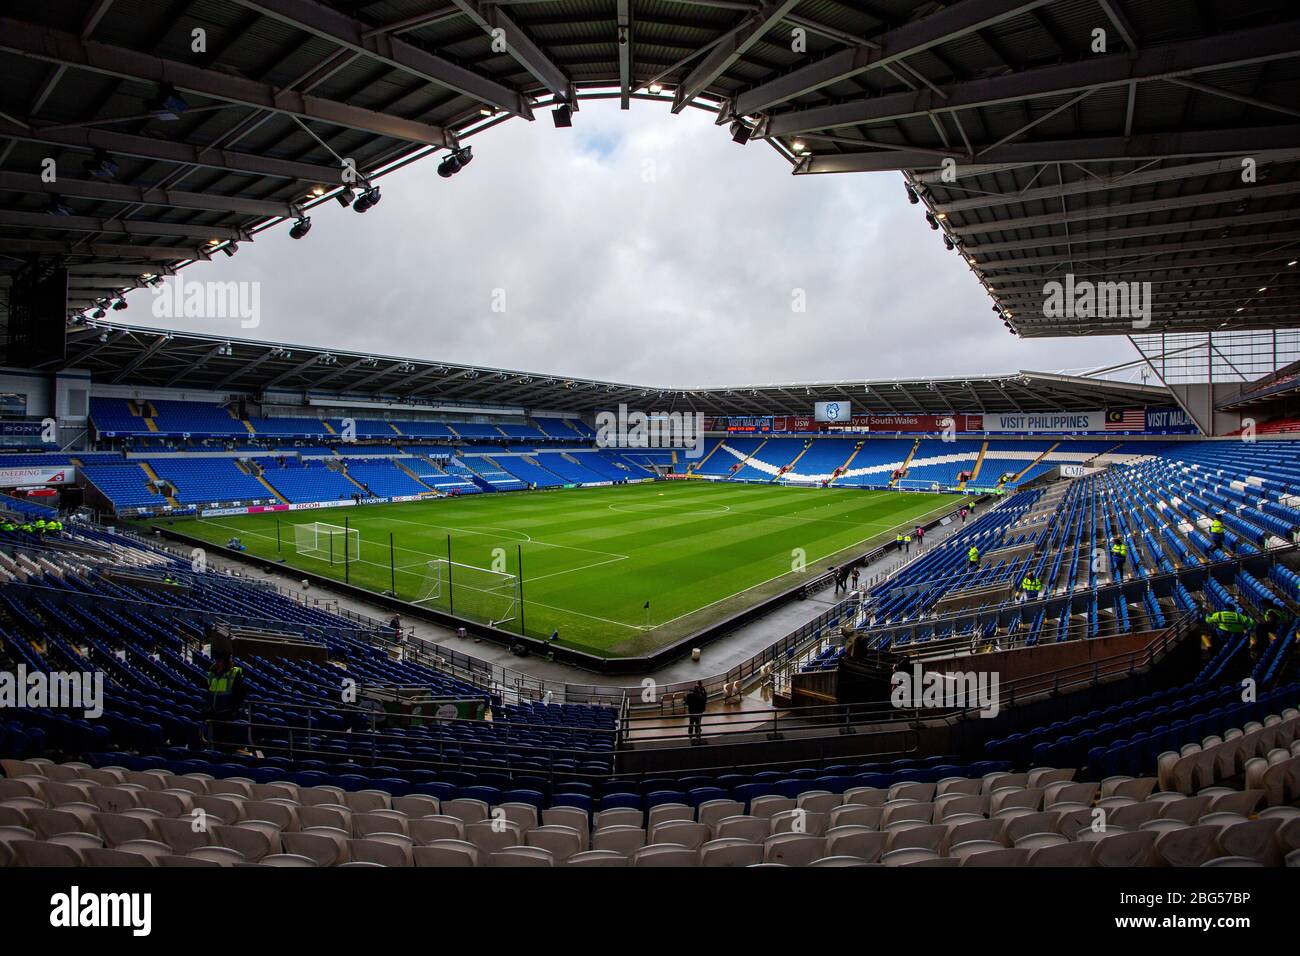 Download wallpapers Cardiff City Stadium, football stadium, grandstand,  Wales, United Kingdom, sports arena for desktop free. Pictures for desktop  free